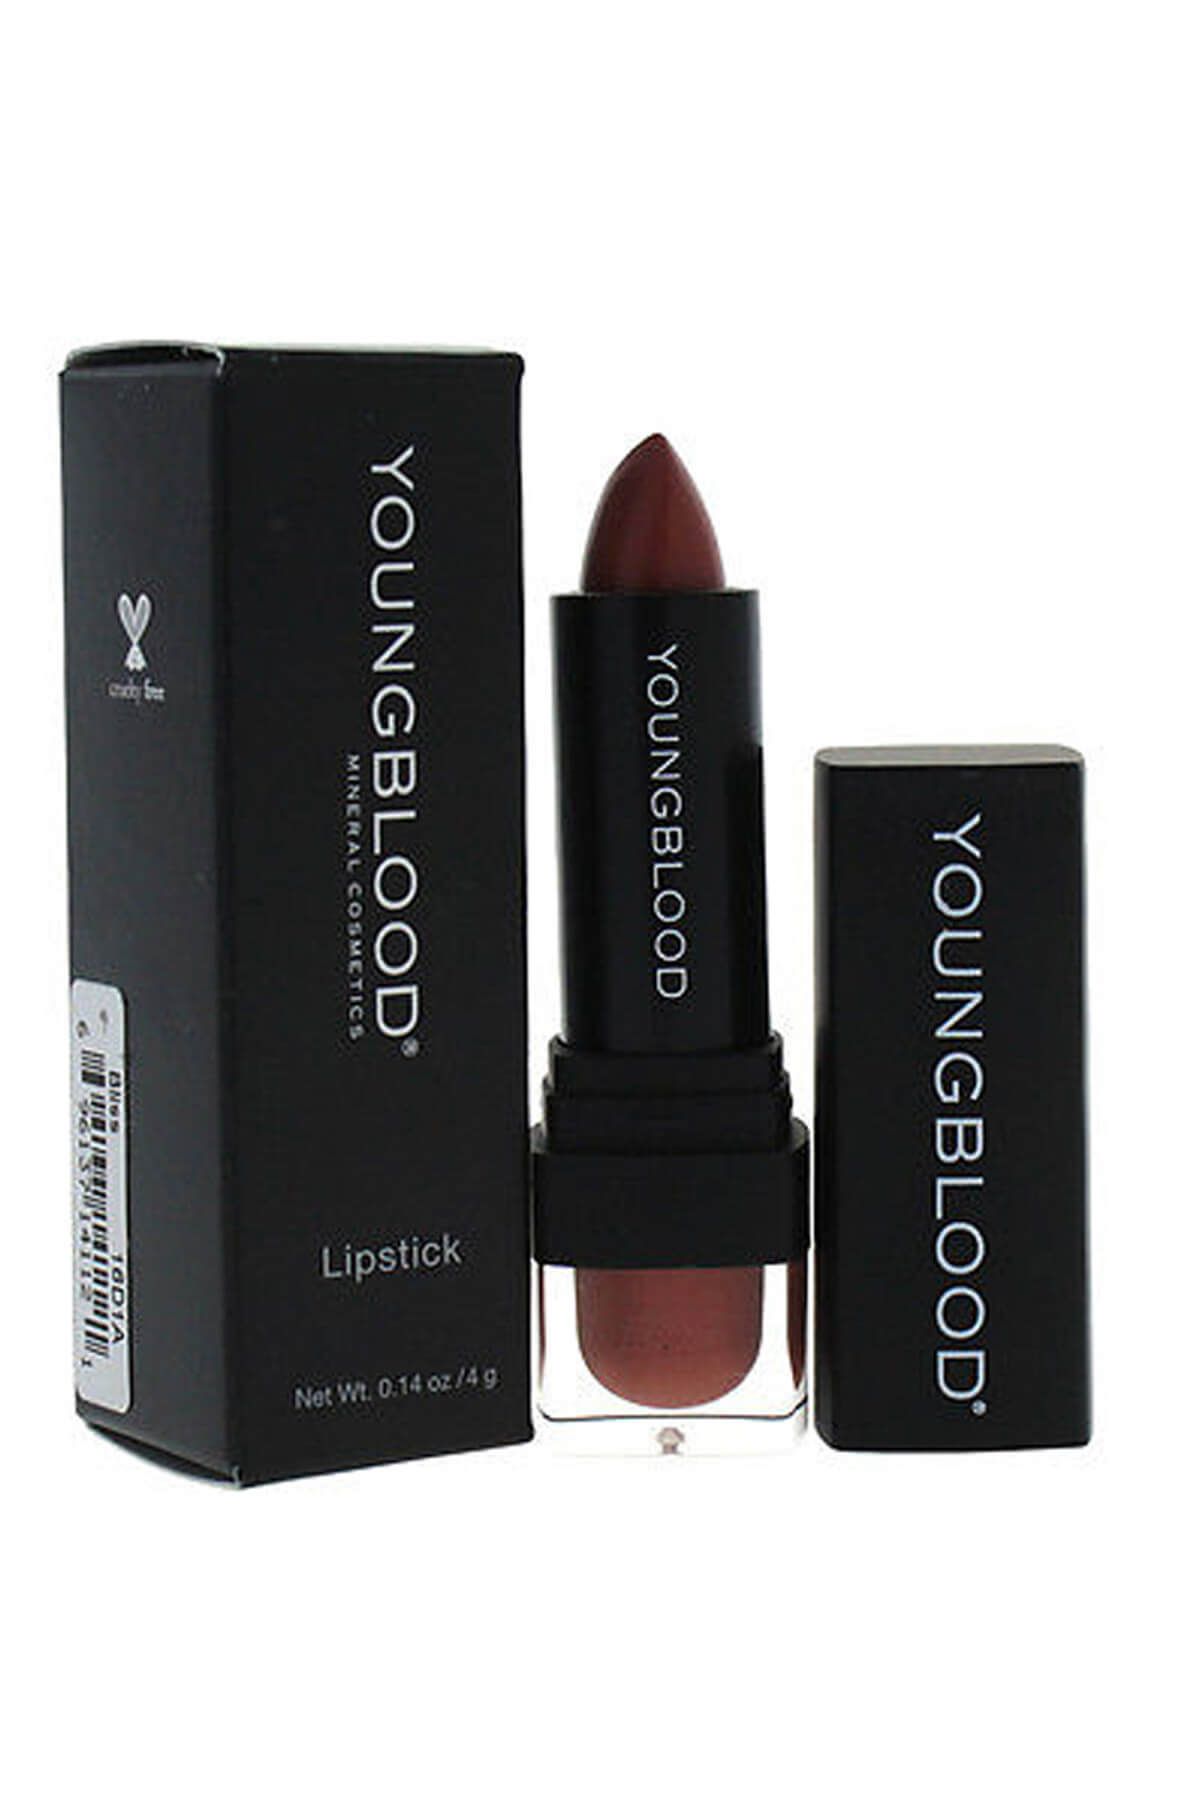 Youngblood Ruj - Lipstick Bliss 696137141121